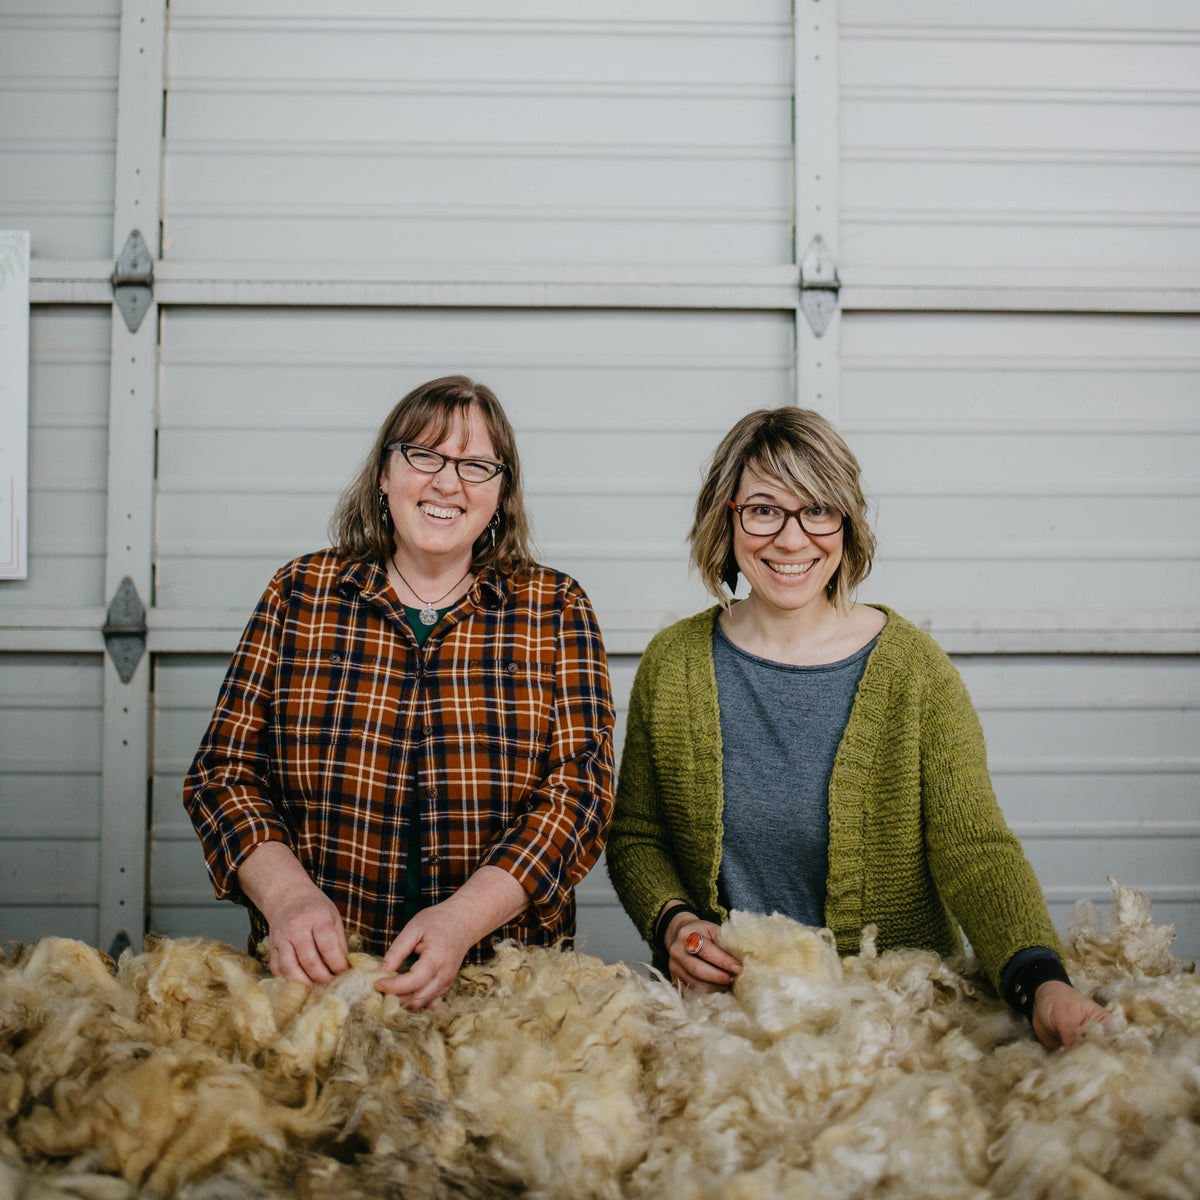 Why Wool Matters Presentation - 2/24 at 10am